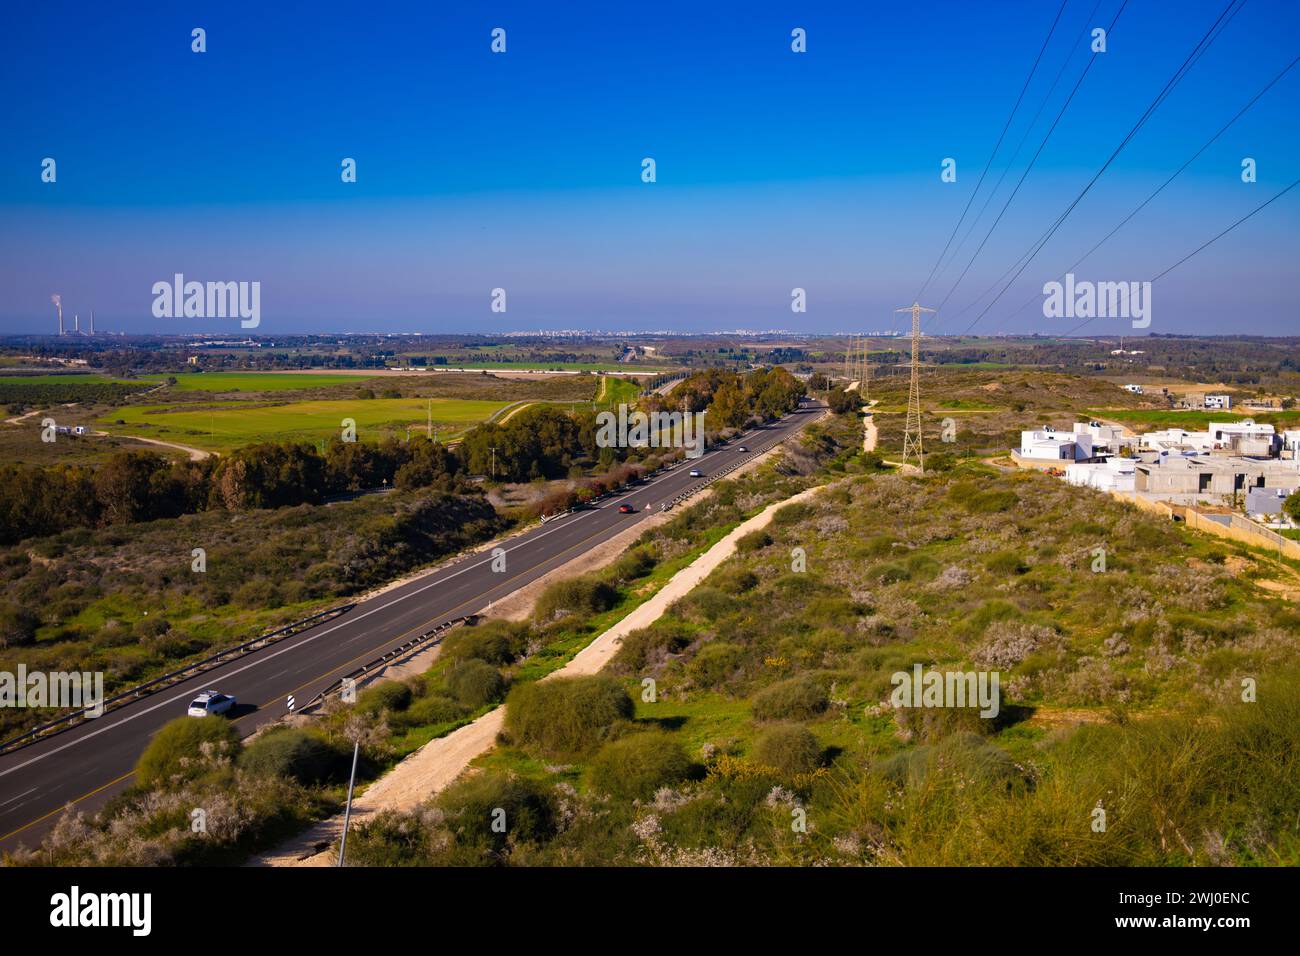 Elevated view capturing the serene landscape and busy highway on the border with Gaza-Hamas, viewed from Sderot. Stock Photo